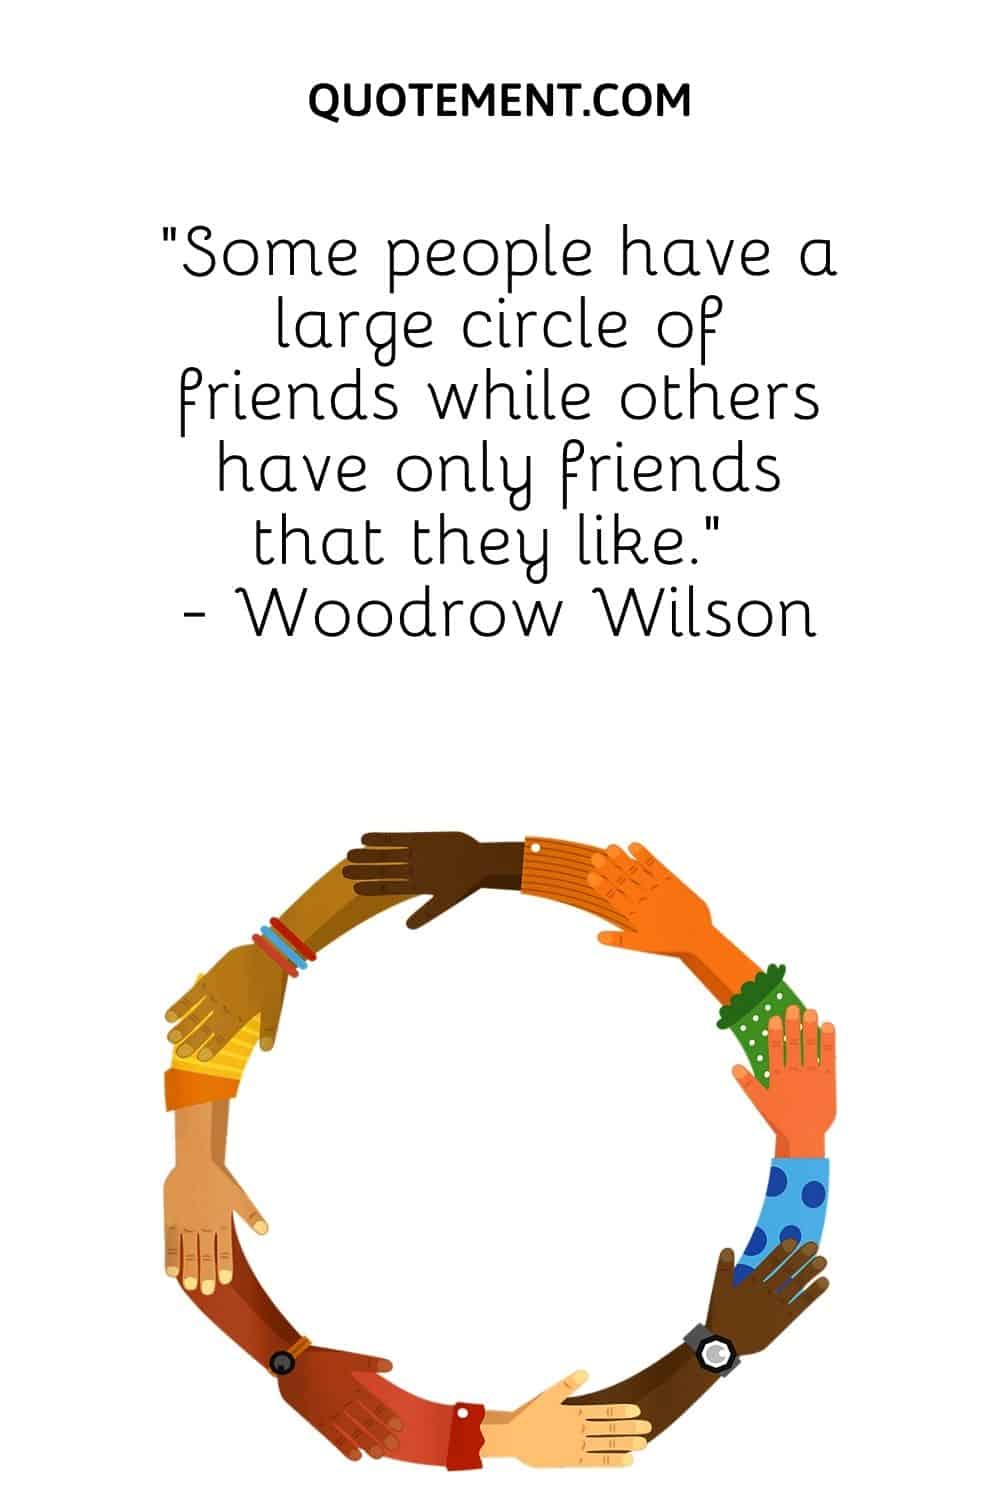 “Some people have a large circle of friends while others have only friends that they like.” - Woodrow Wilson